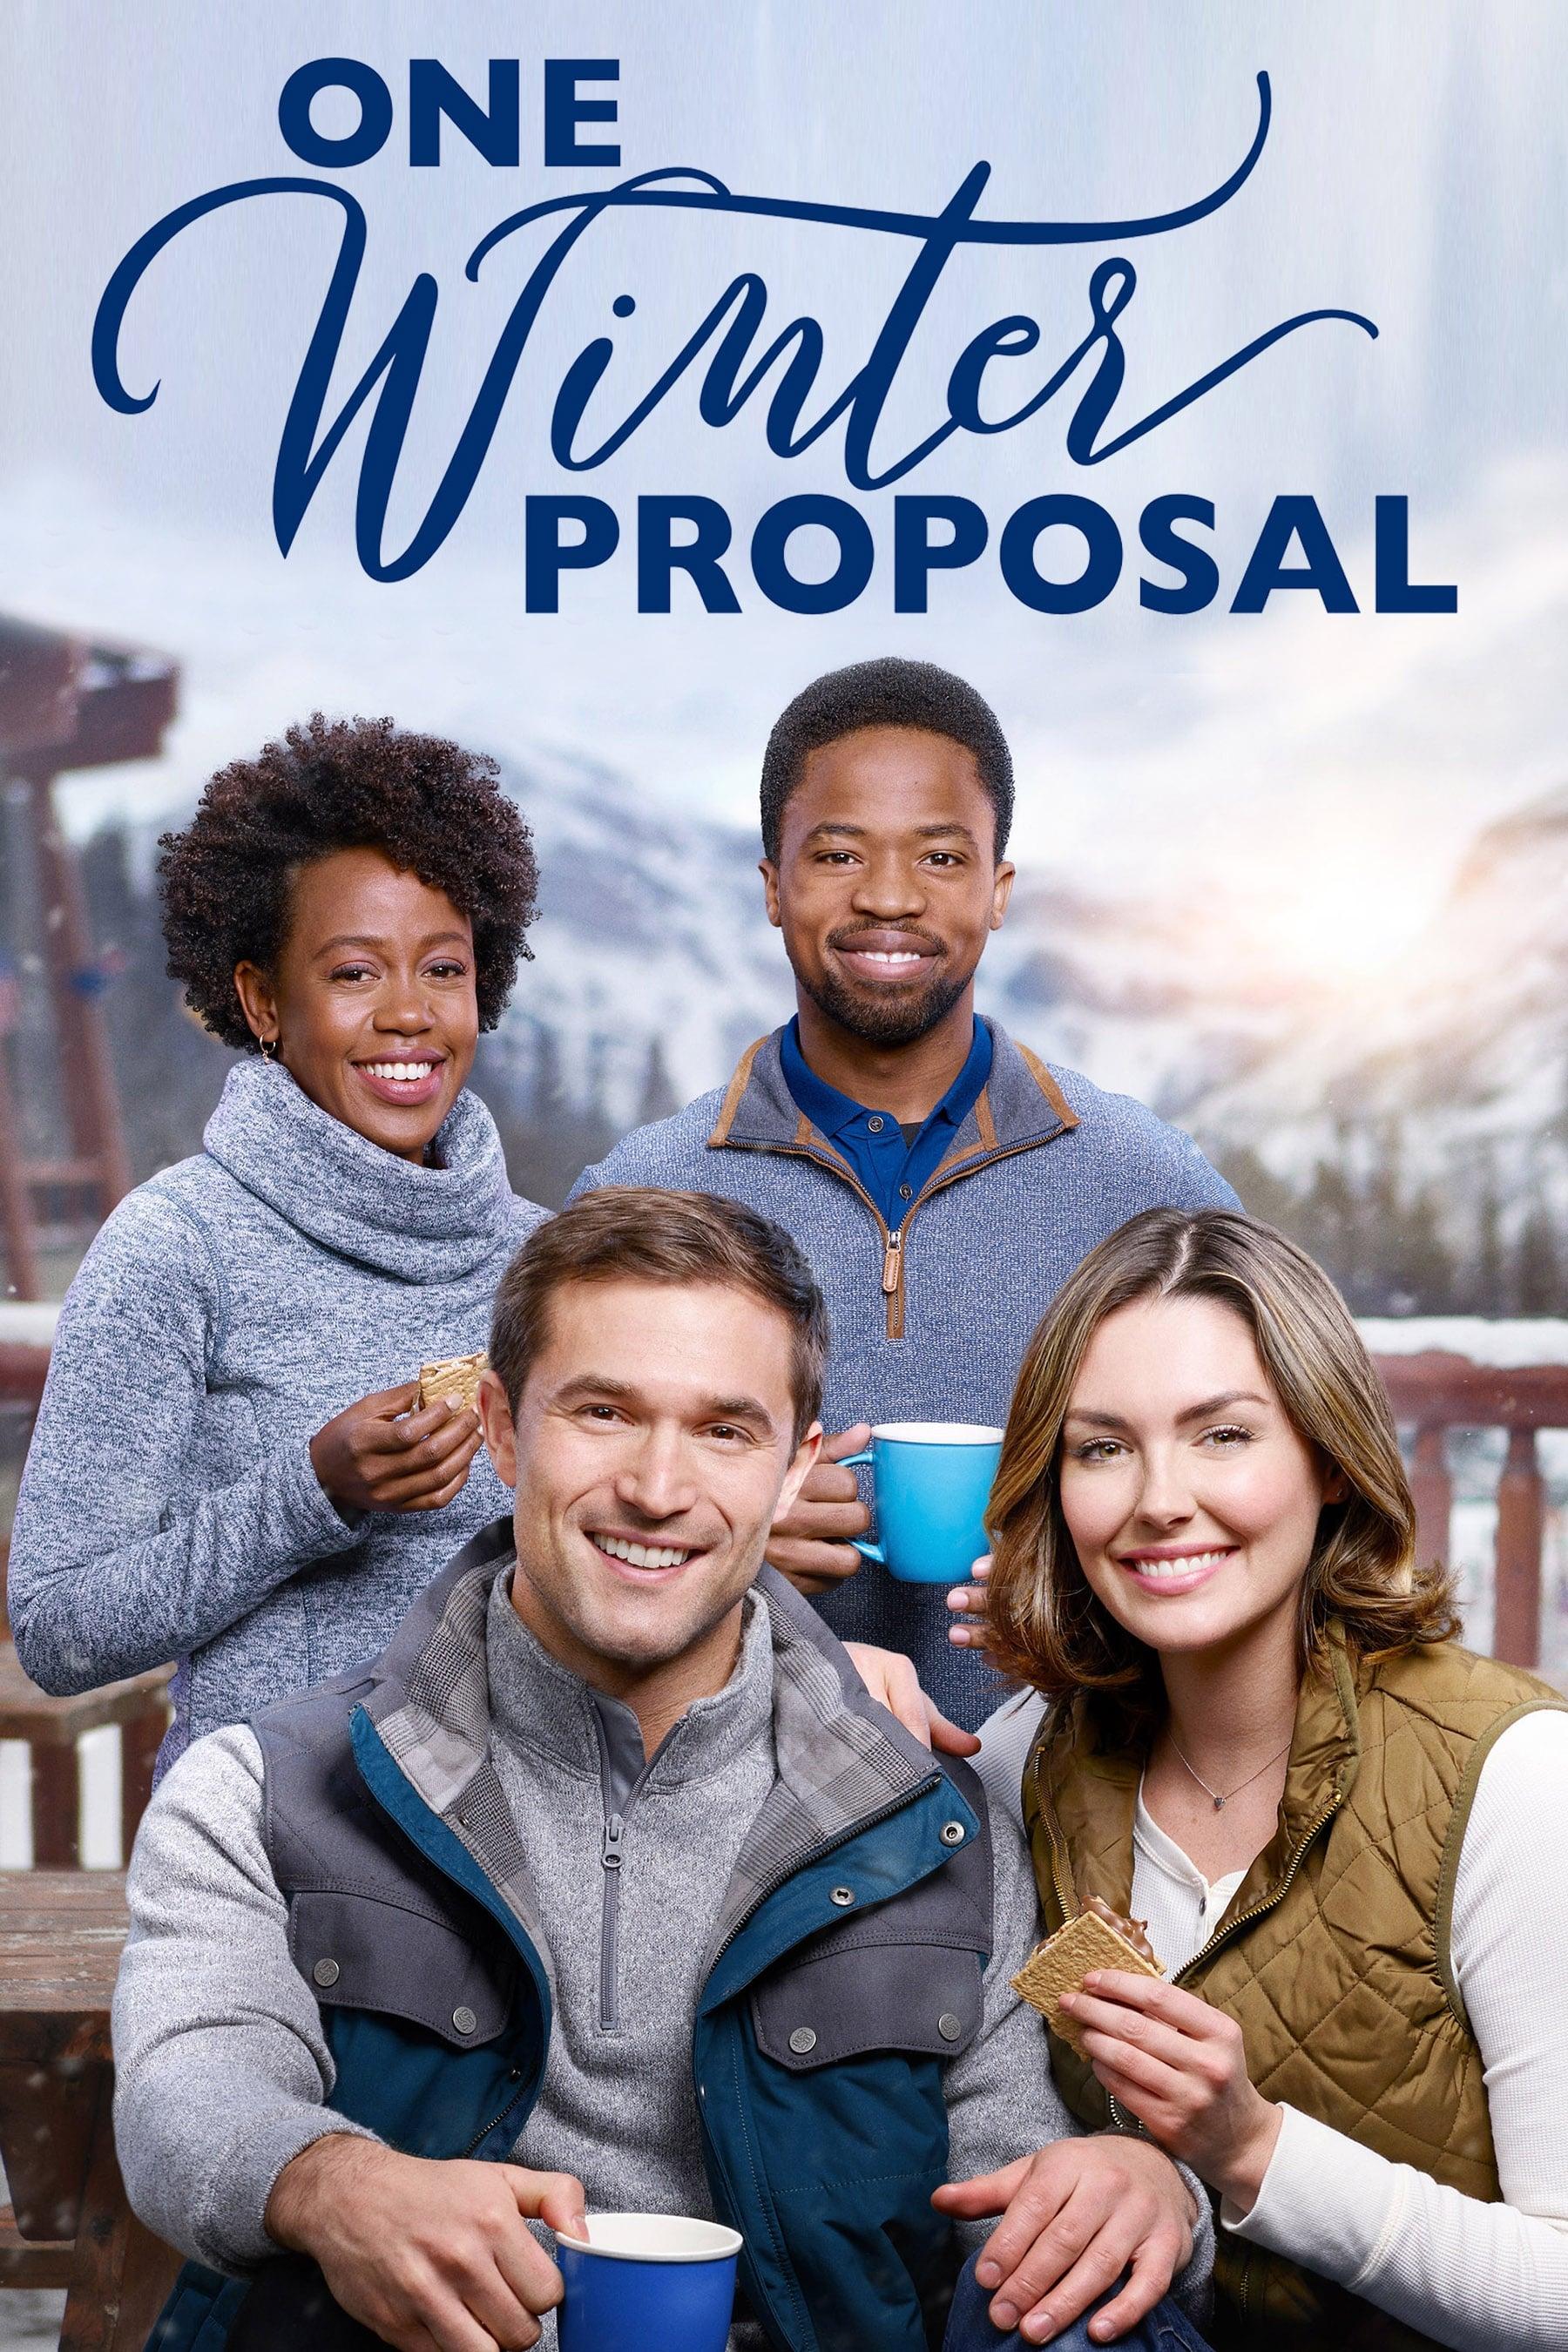 One Winter Proposal poster